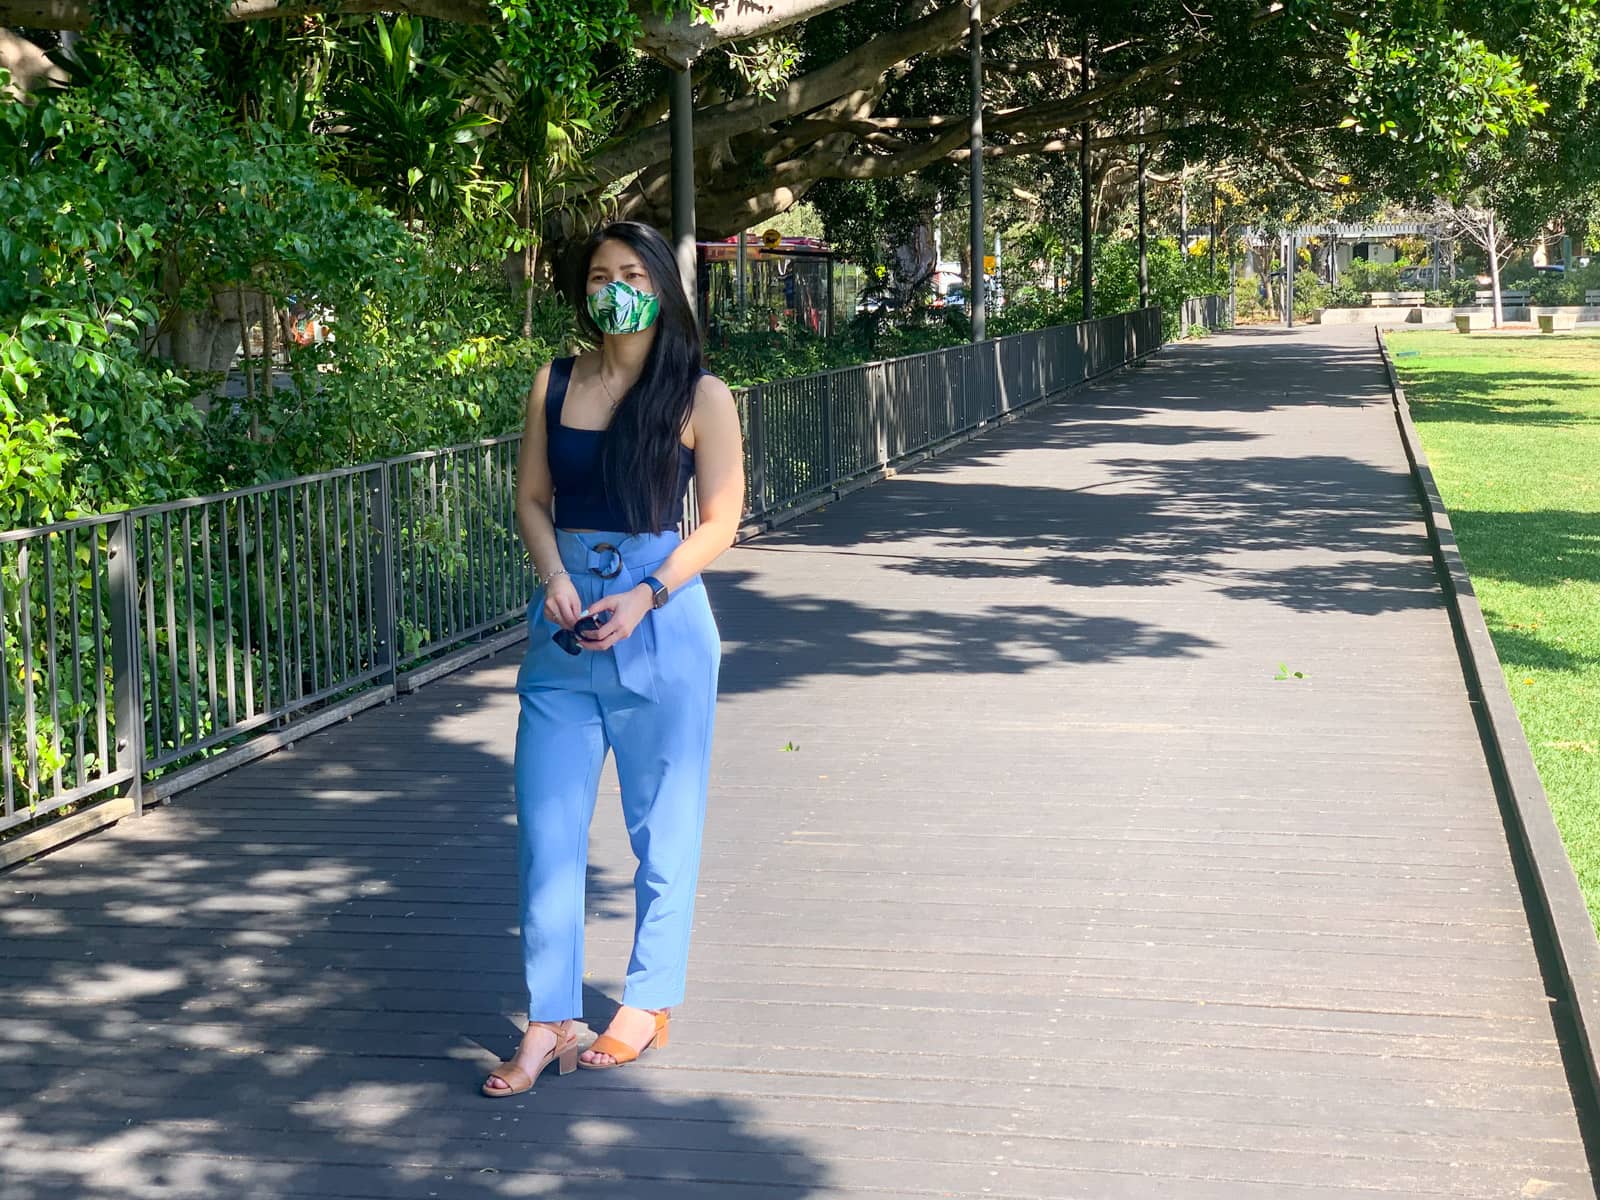 A woman with long dark hair, wearing a navy blue square neck top and a sky blue pair of pants with a buckle detail at the waist. She is wearing a face mask with a green leaf pattern. She is holding sunglasses in her hands and is standing on a wooden path.